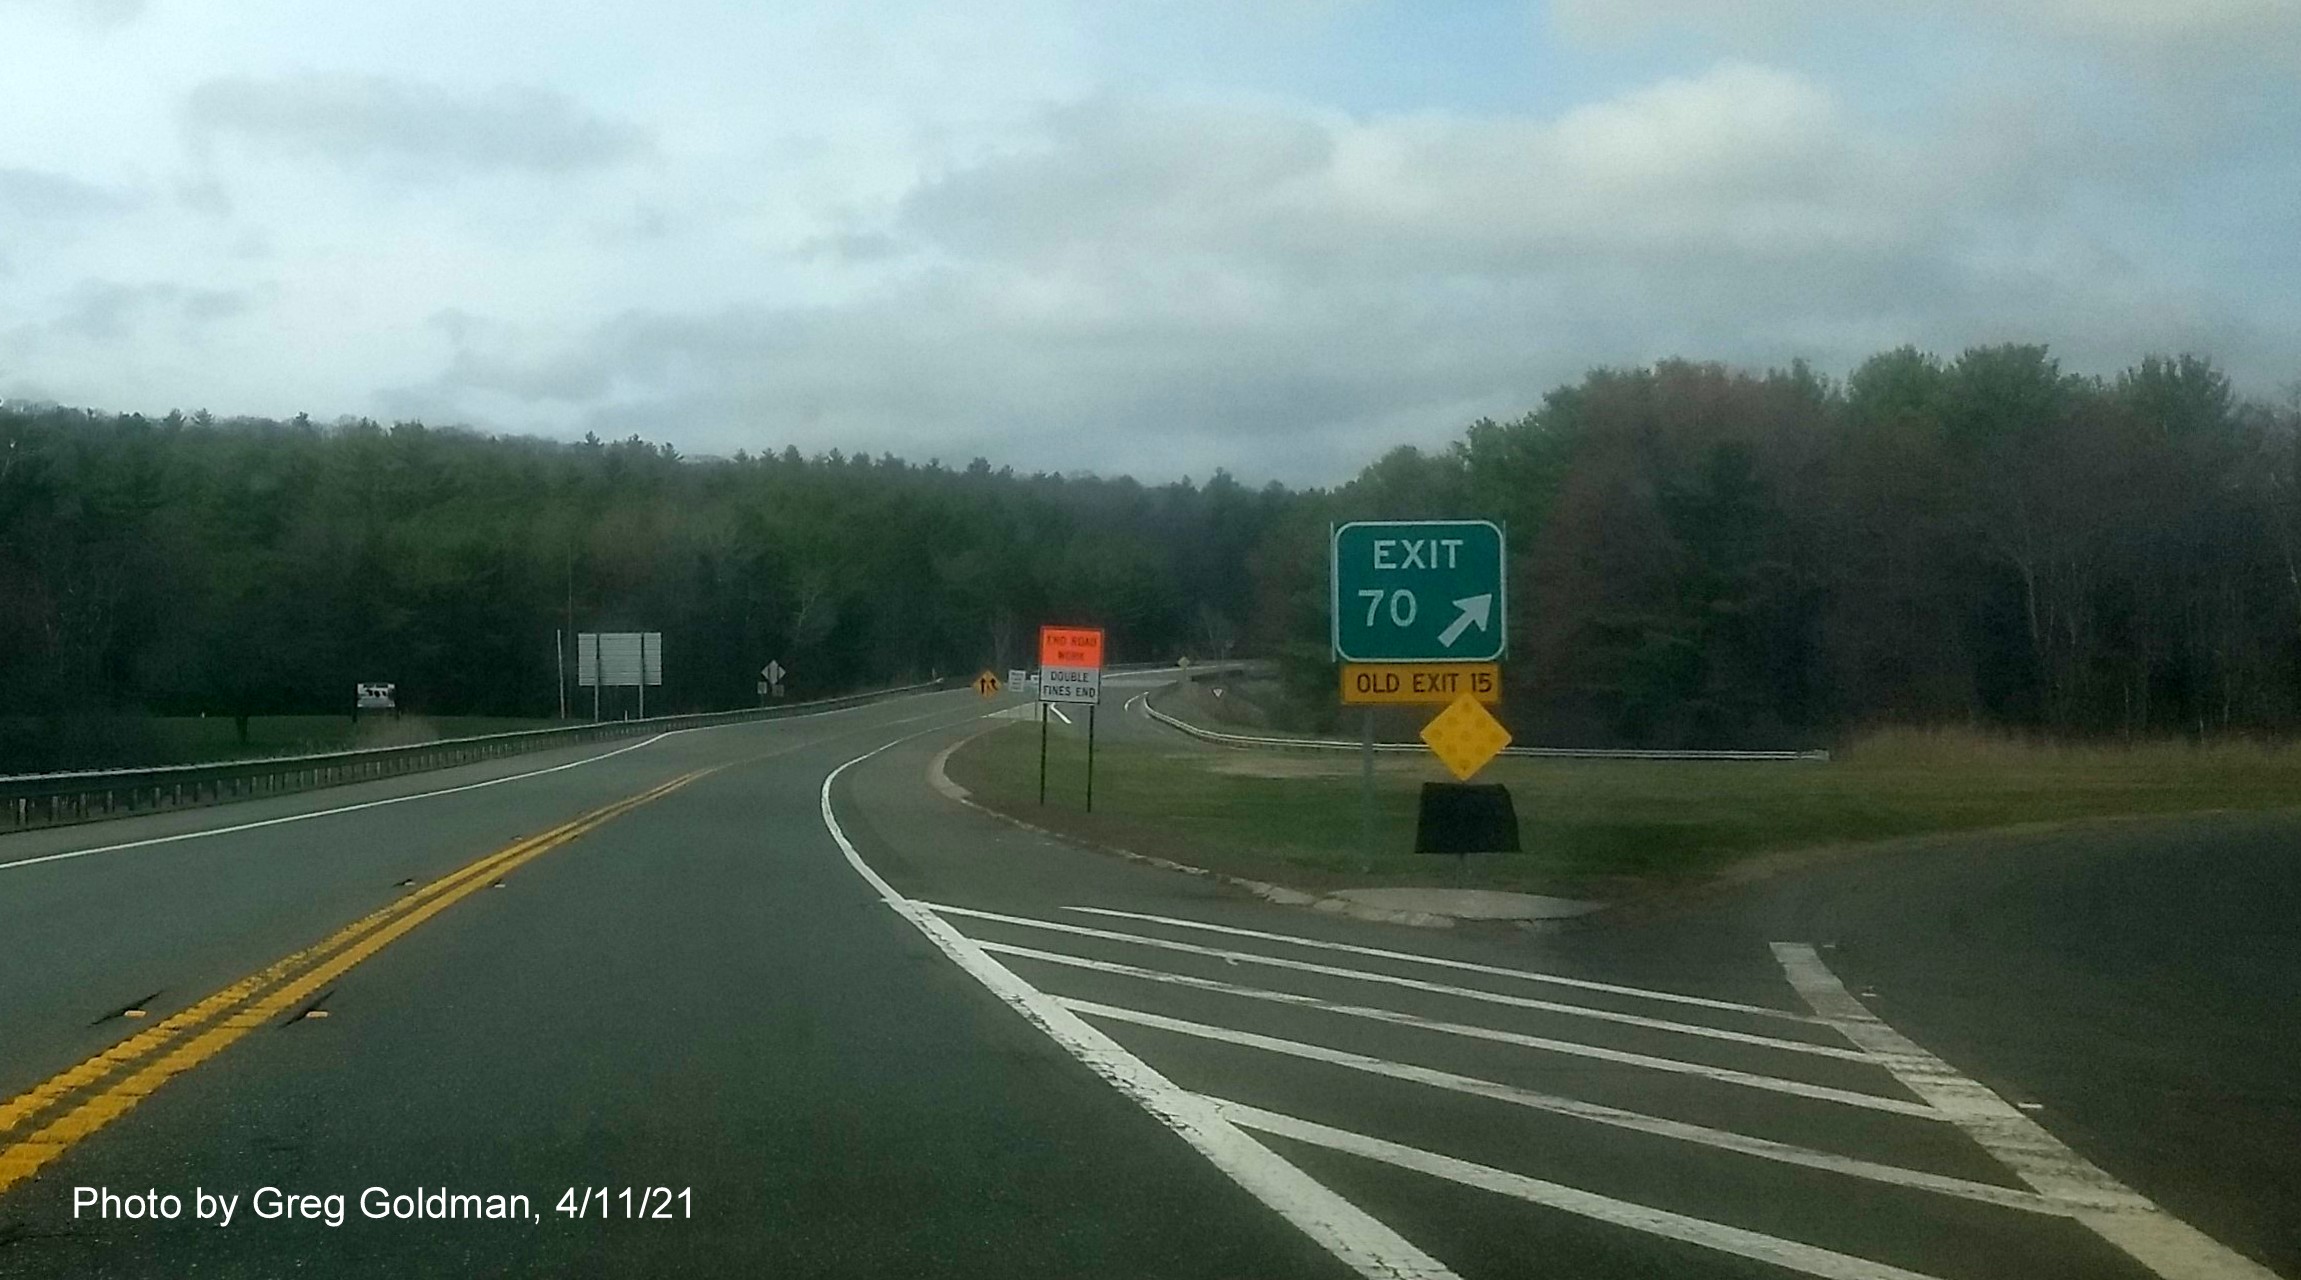 Image of gore sign for MA 122 exit with new milepost based exit number and yellow Old Exit 15 sign attached below on MA 2 West in Orange, by Greg Goldman, April 2021